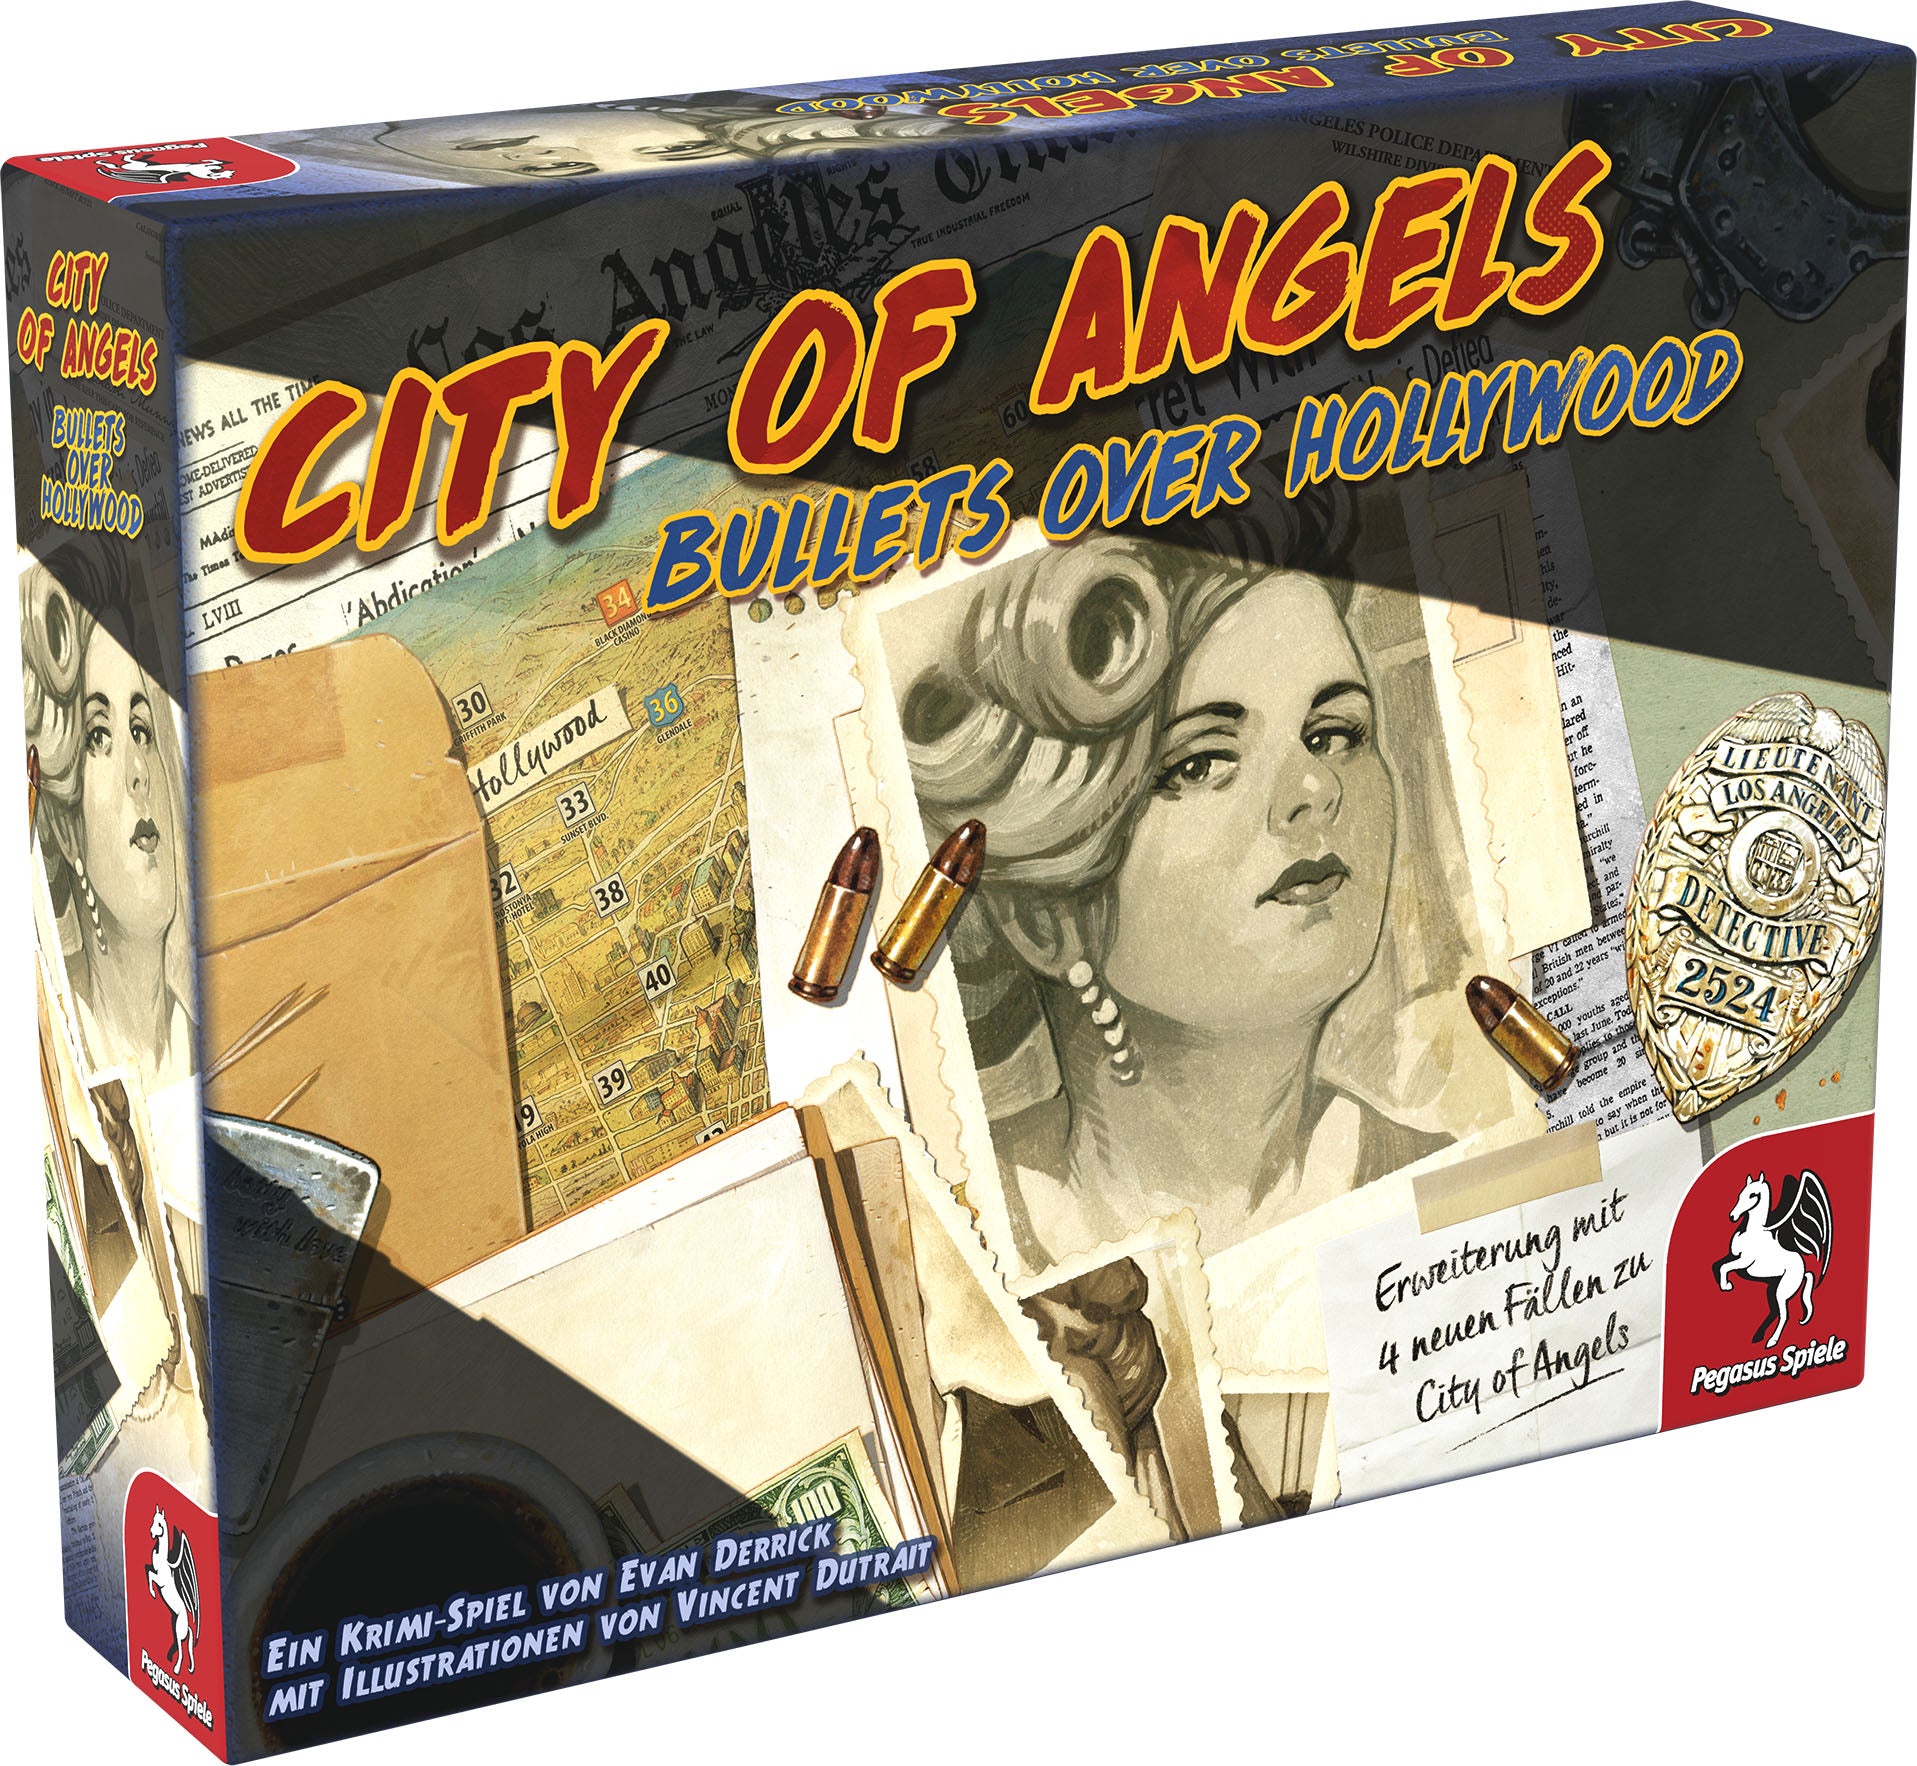 City of Angels - Bullets over Hollywood